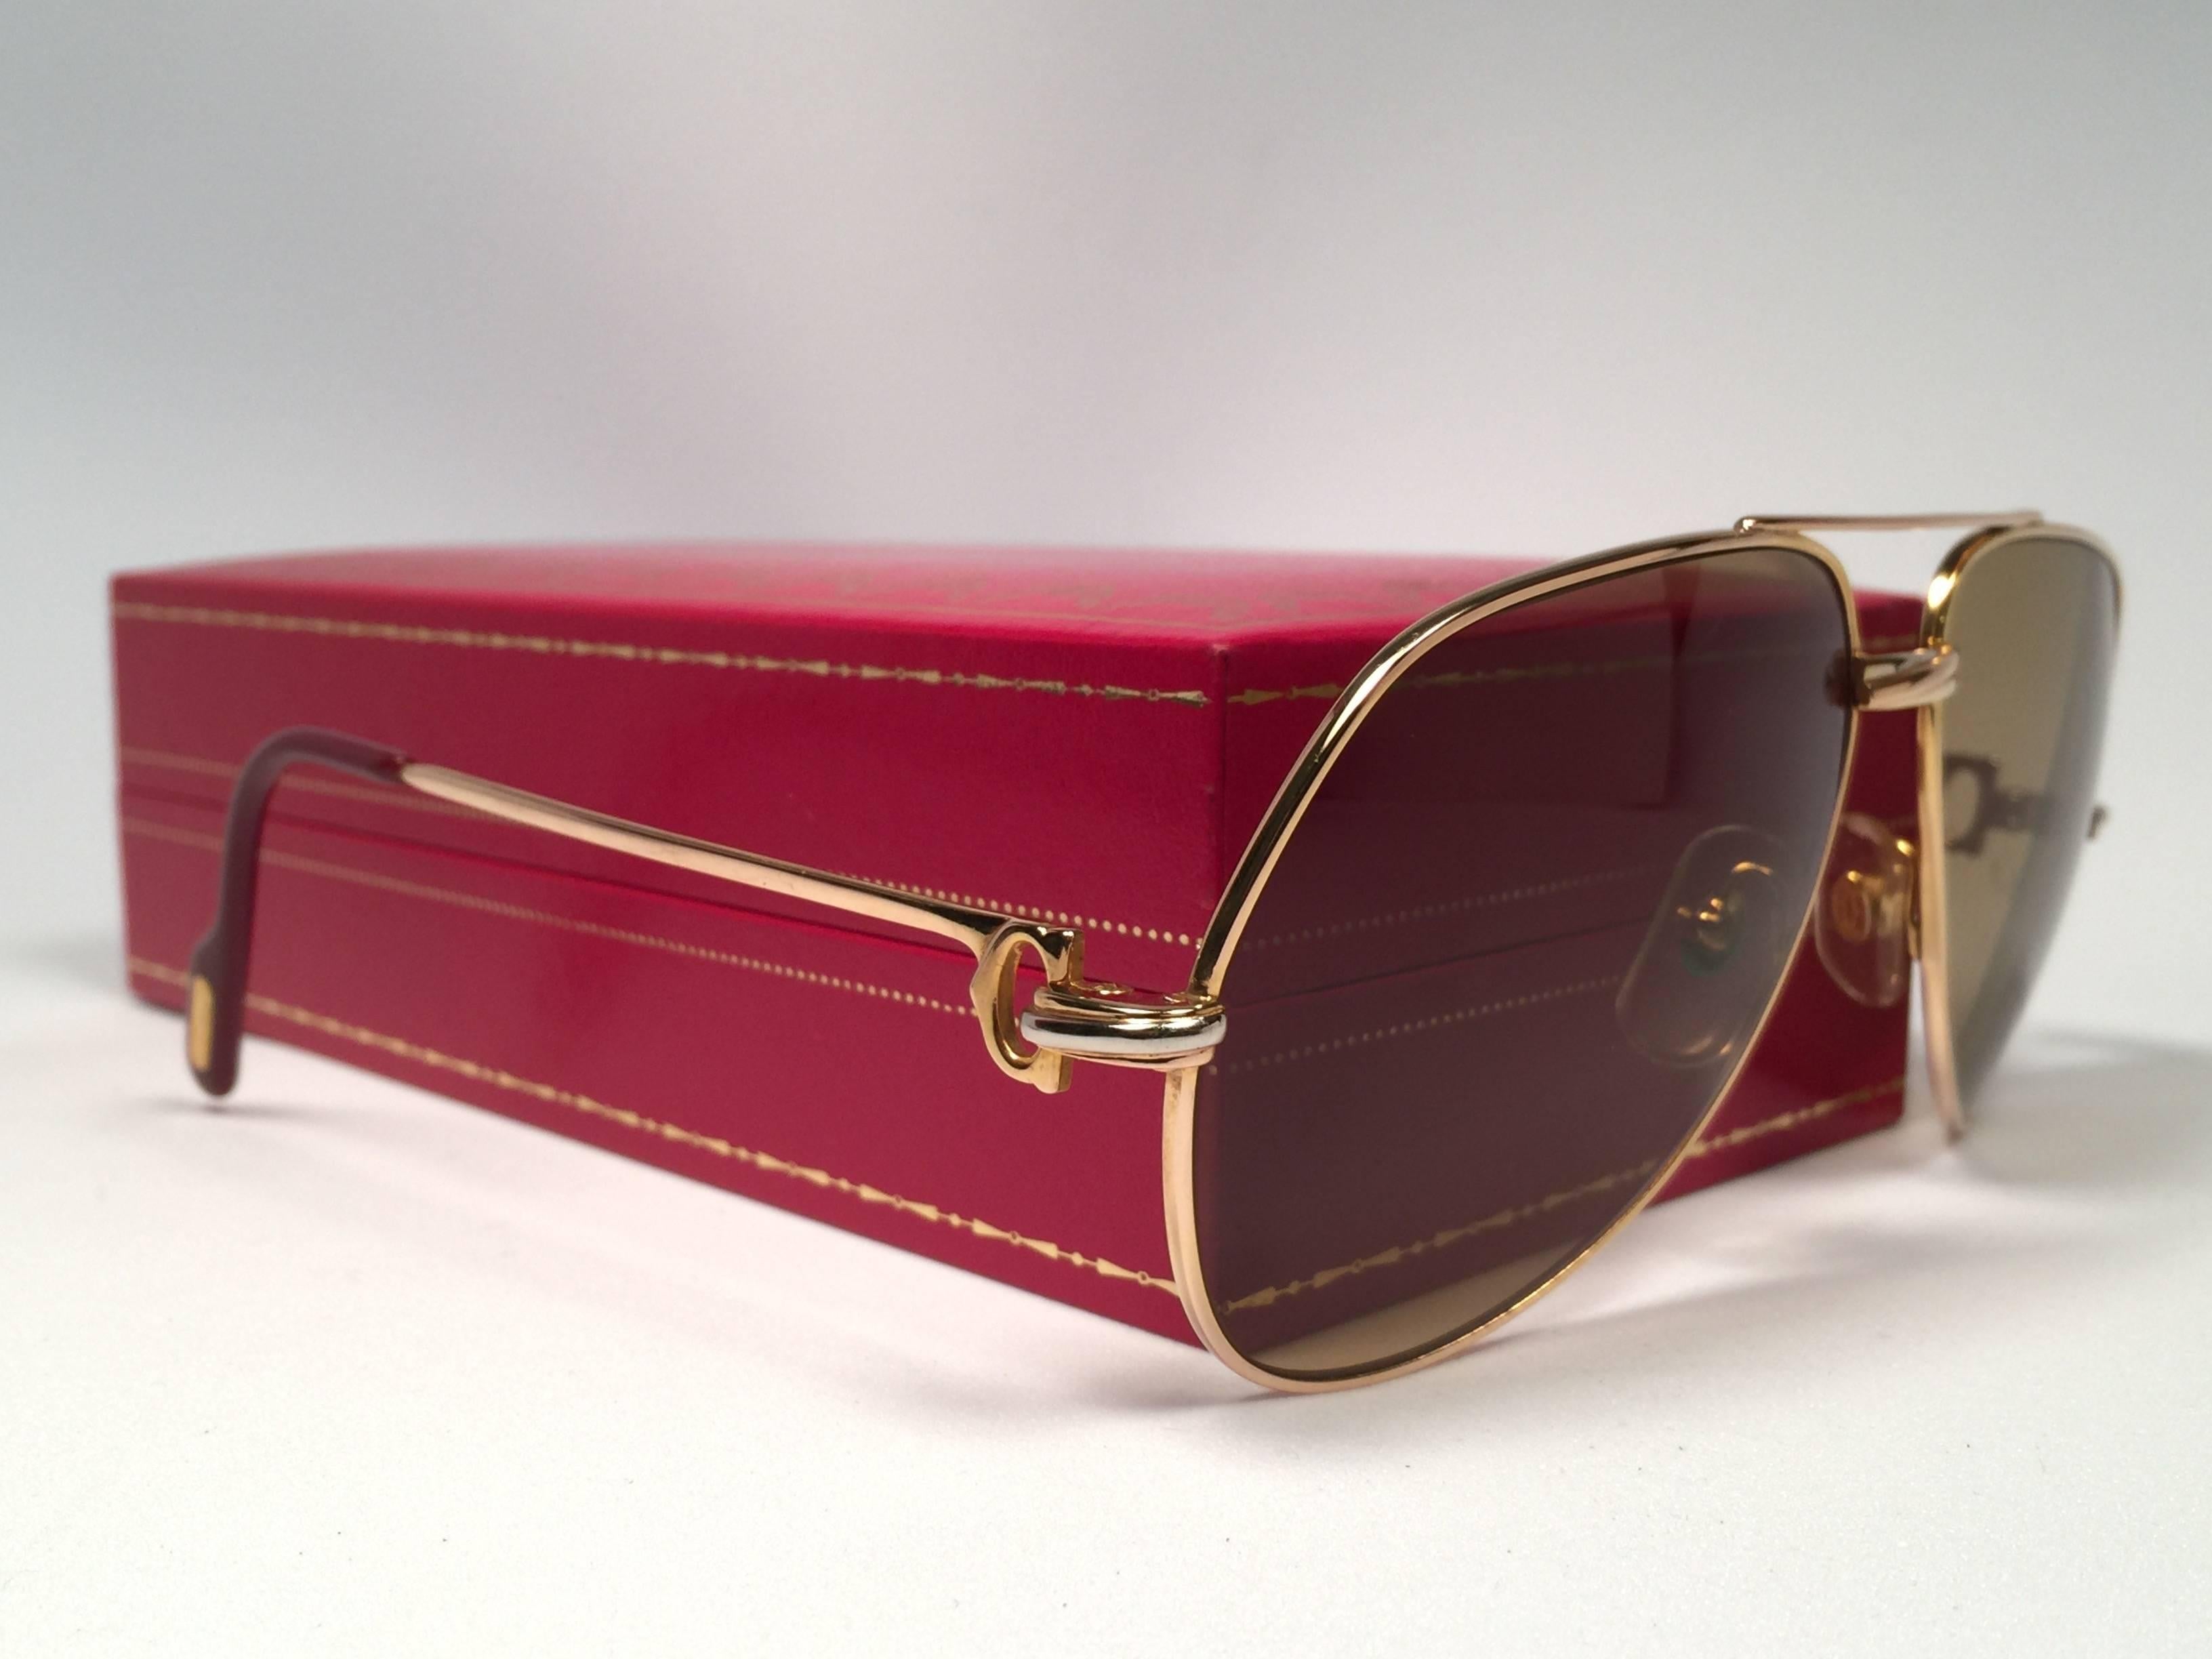 Women's or Men's New Cartier Ultra Rare Vendome 18K 750 Gold Filled Sunglasses Made in France